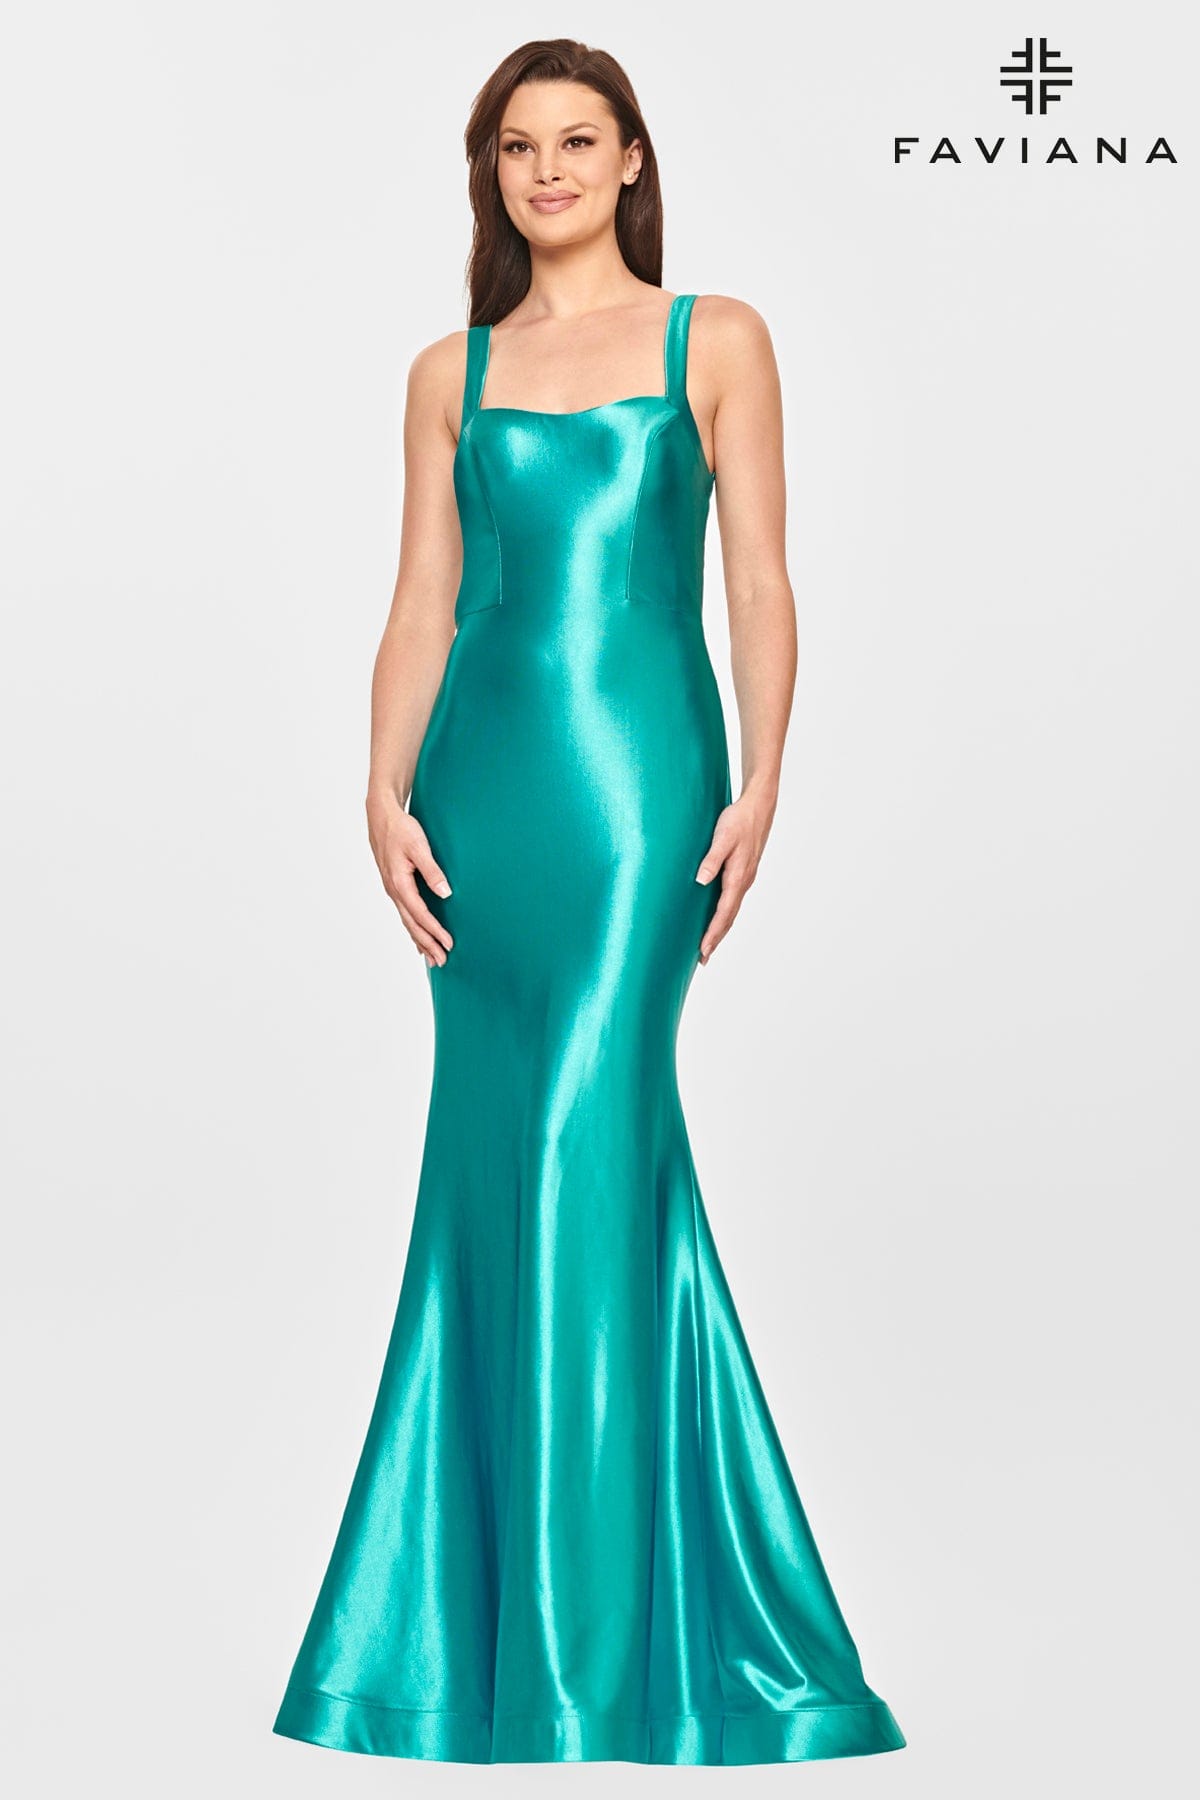 Satin Scoop Neck Dress With Strappy Open Back Detailing And Fit And Flare Skirt